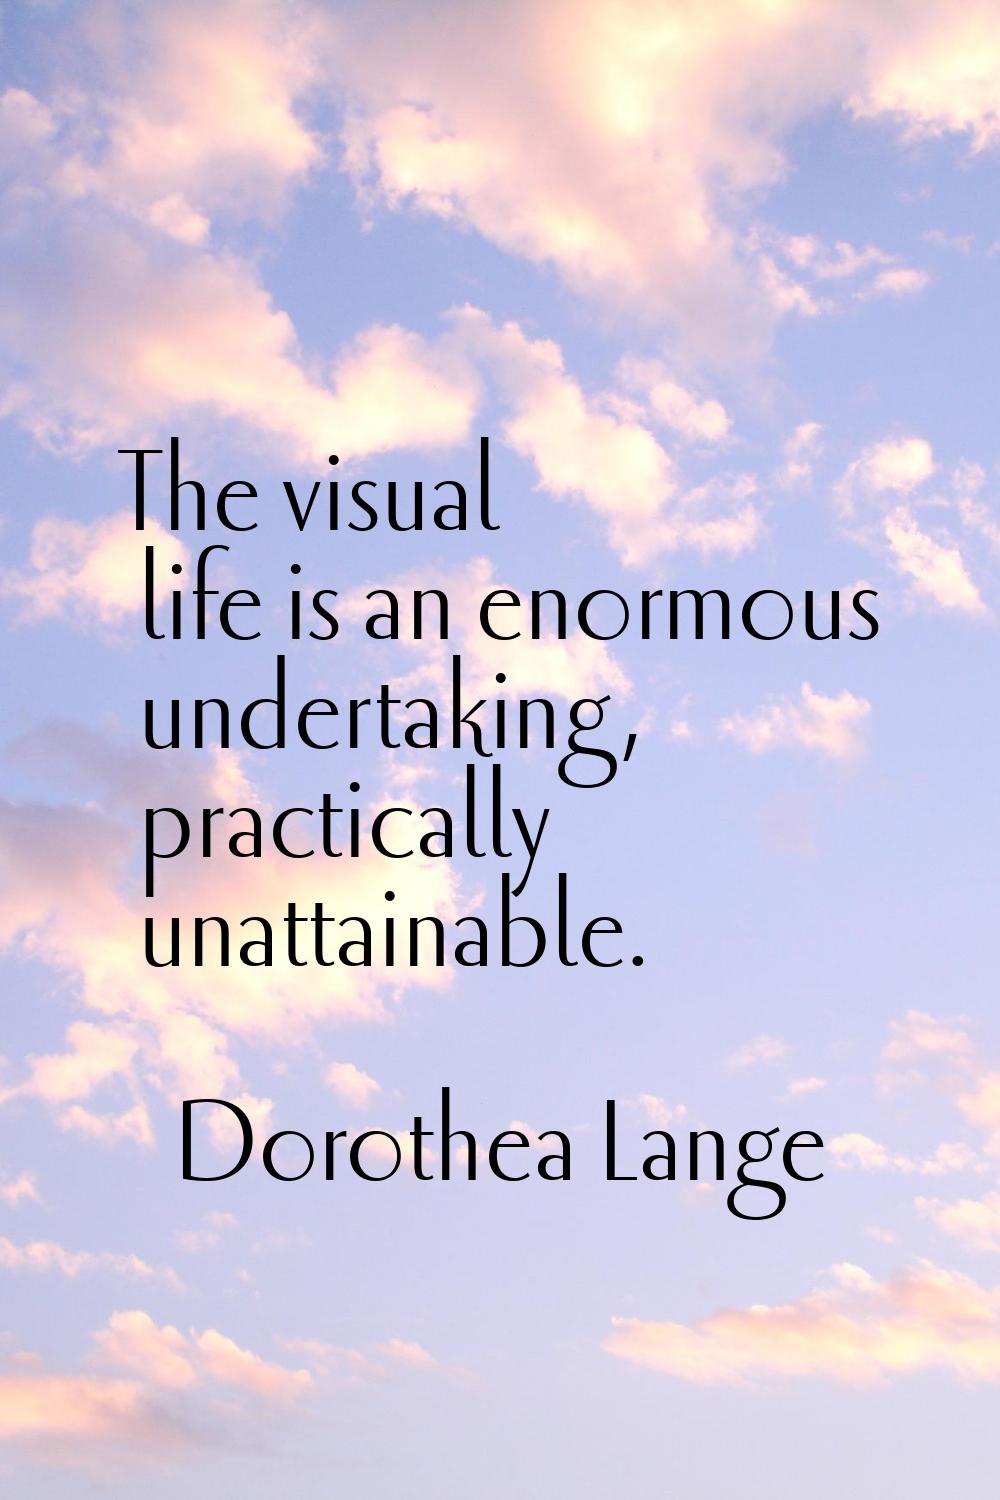 The visual life is an enormous undertaking, practically unattainable.